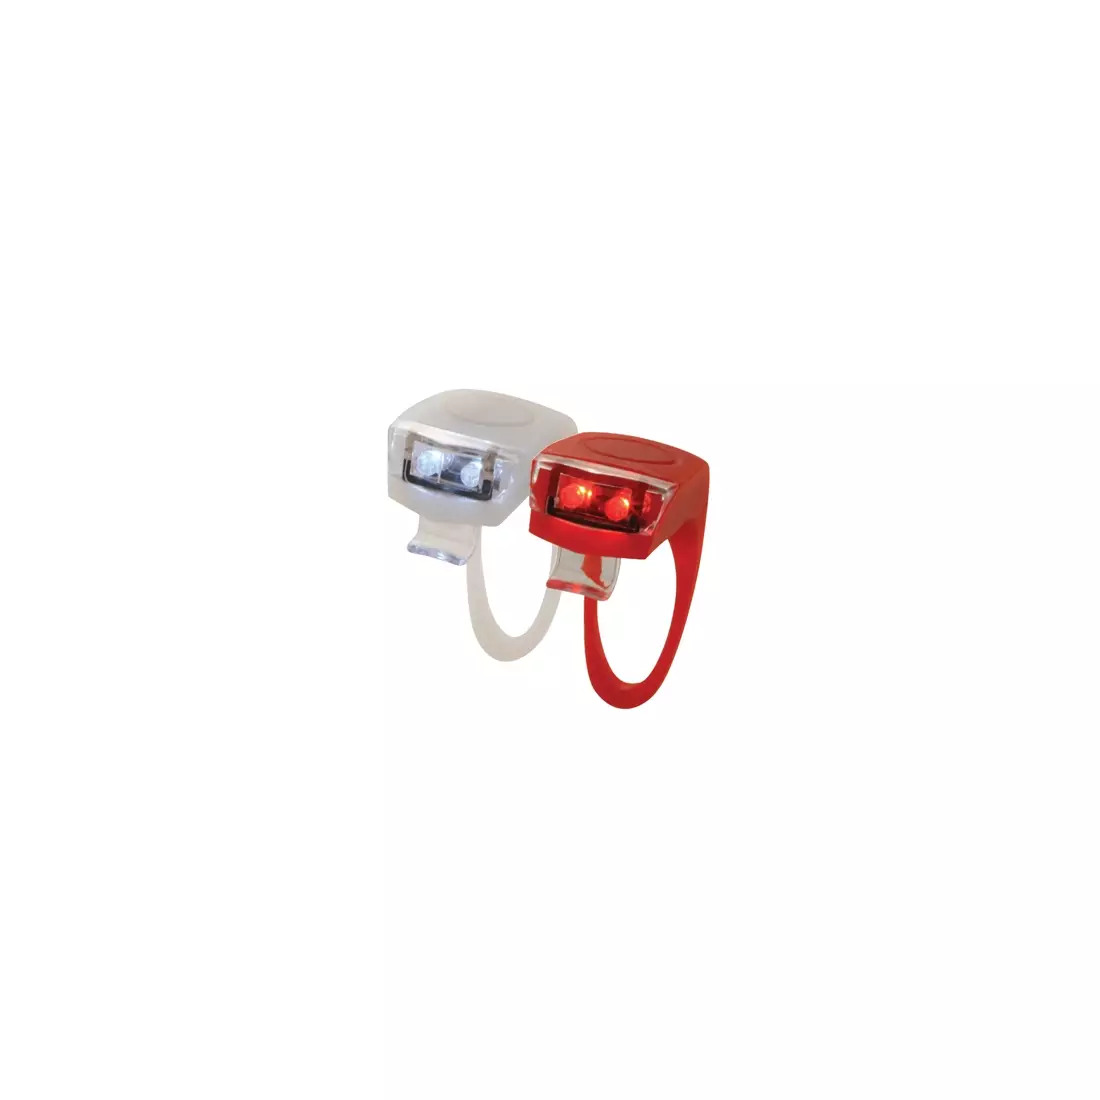 TORCH Bright Flex 2 - set of lights - color: Red and white